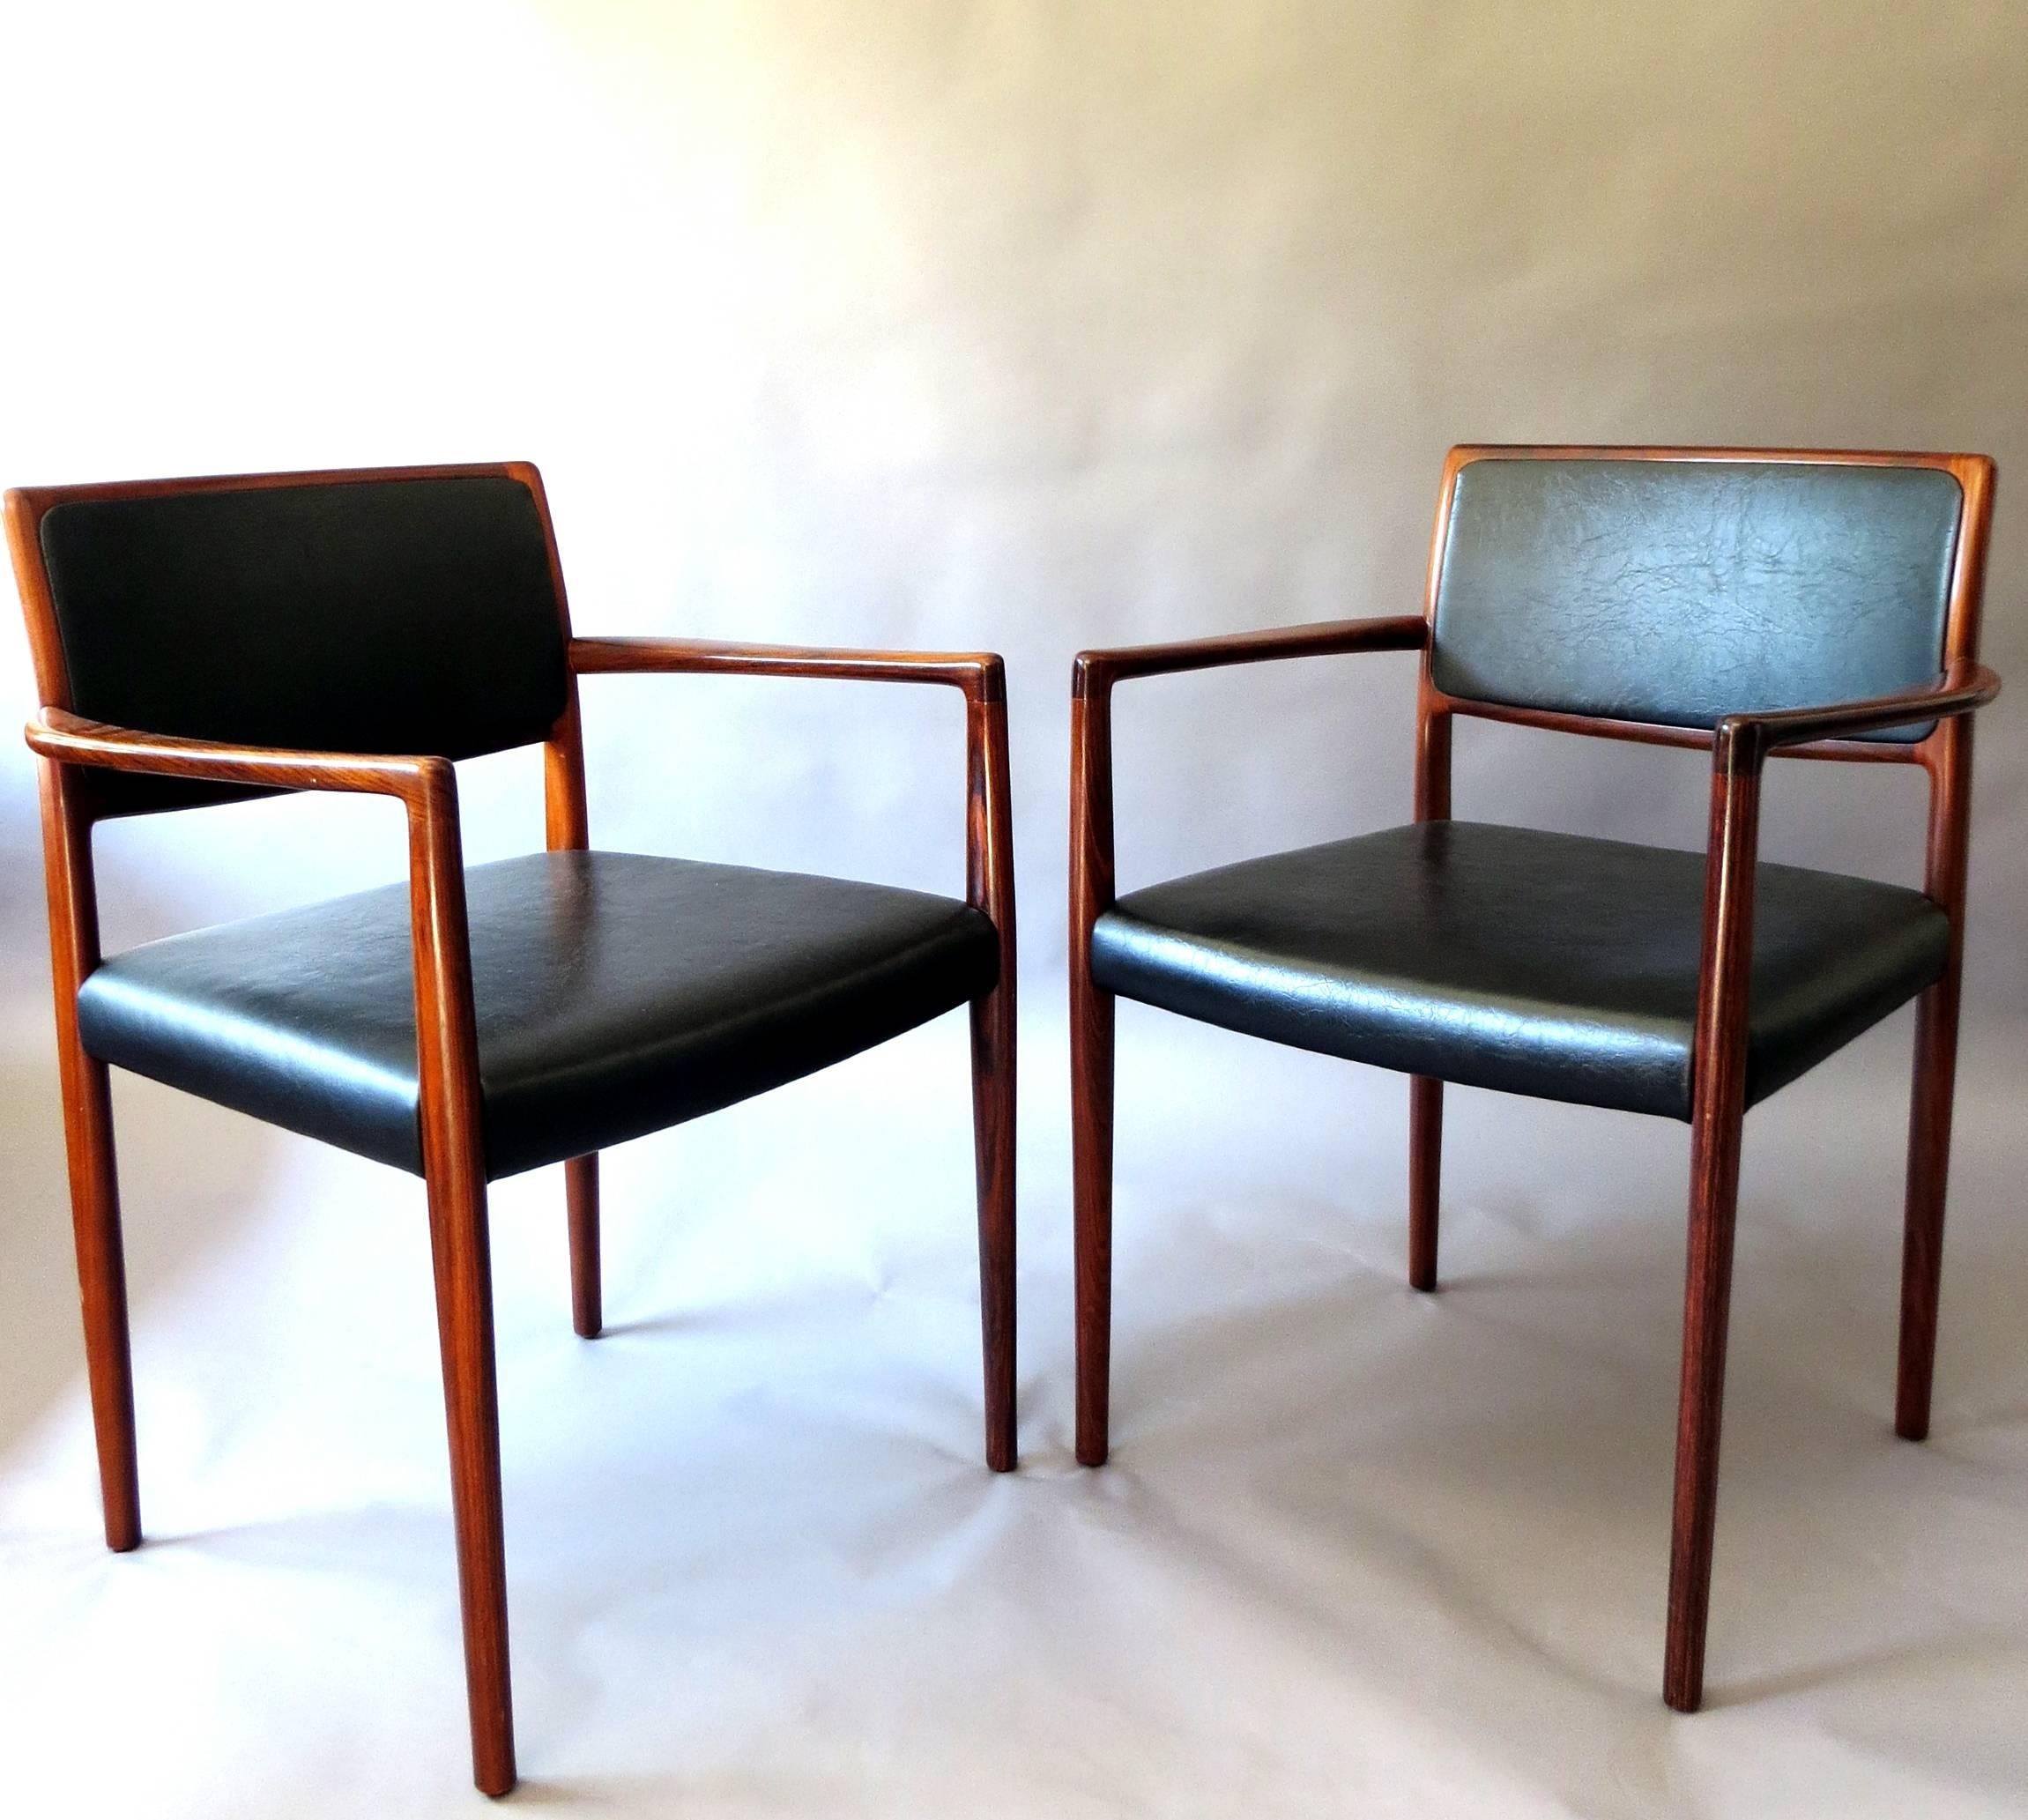 Danish Mid-Century Modern Rosewood and Leather Dining Chairs, Set of Two, 1960s (Skandinavische Moderne) im Angebot